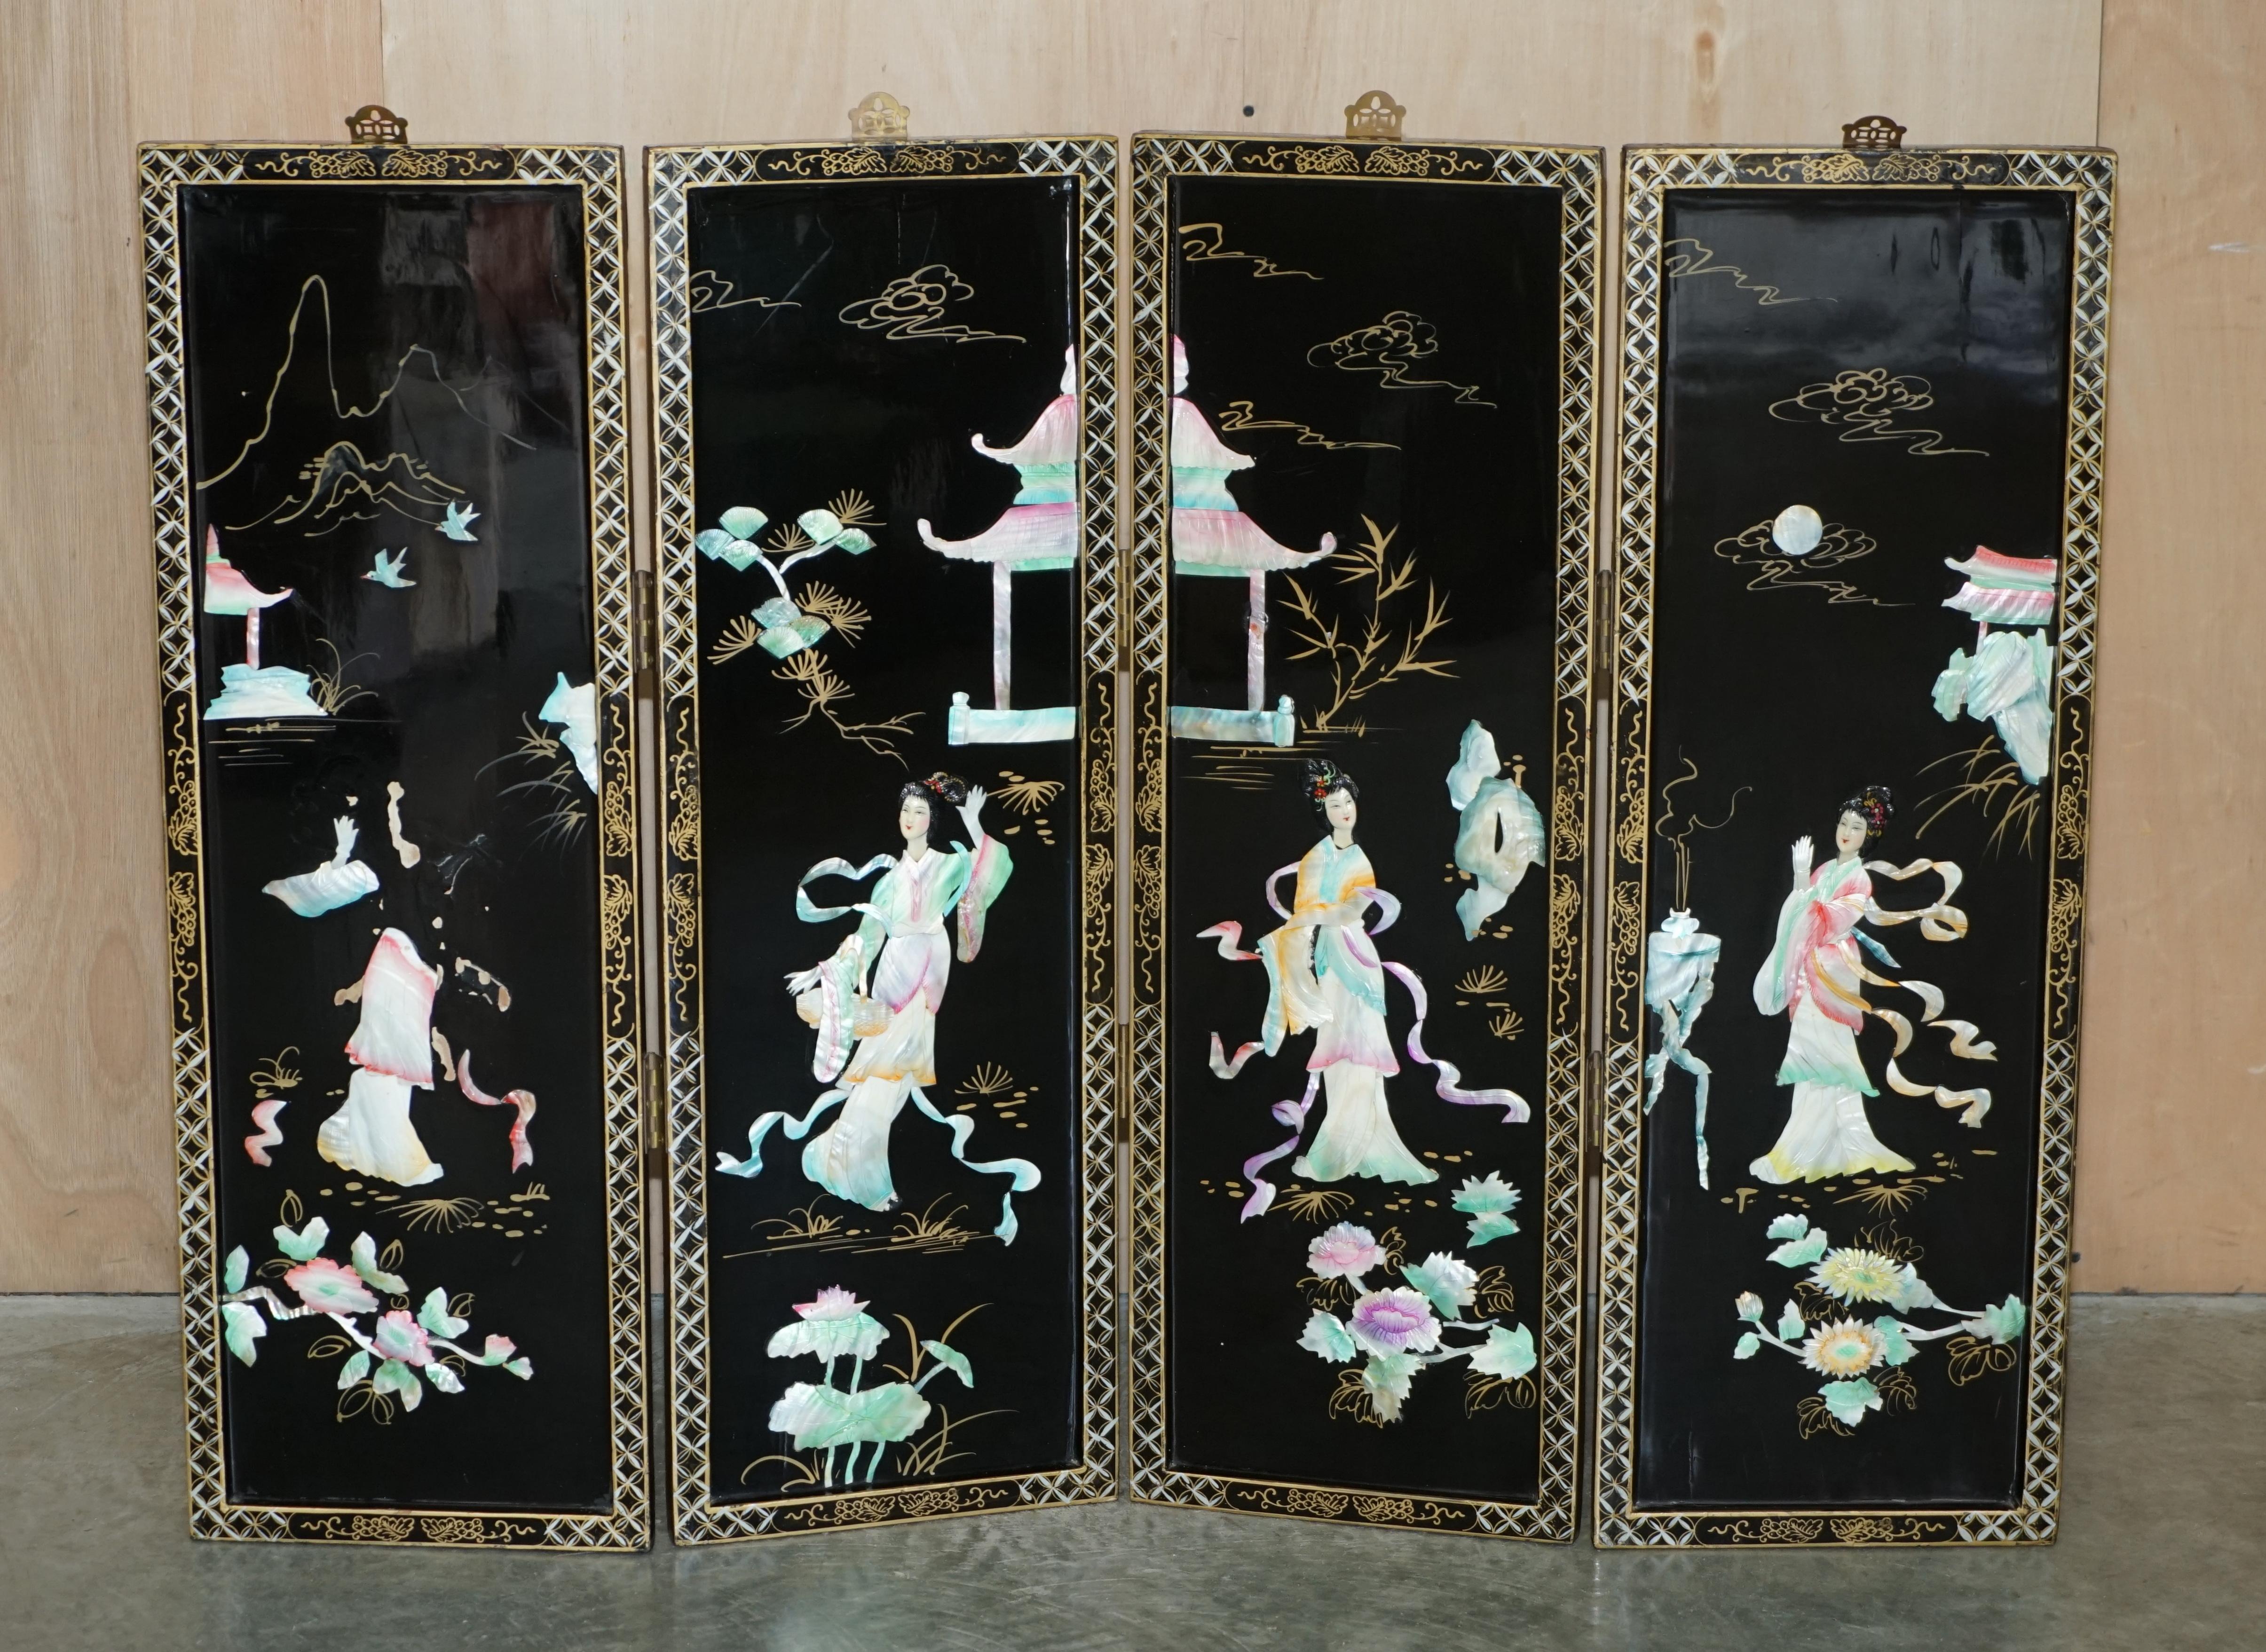 We are delighted to offer for sale this extremely well made and highly collectable Chinese Export circa 1920’s Soapstone room divider folding screen depicting Geisha Girls 

Please note the delivery fee listed is just a guide, it covers within the